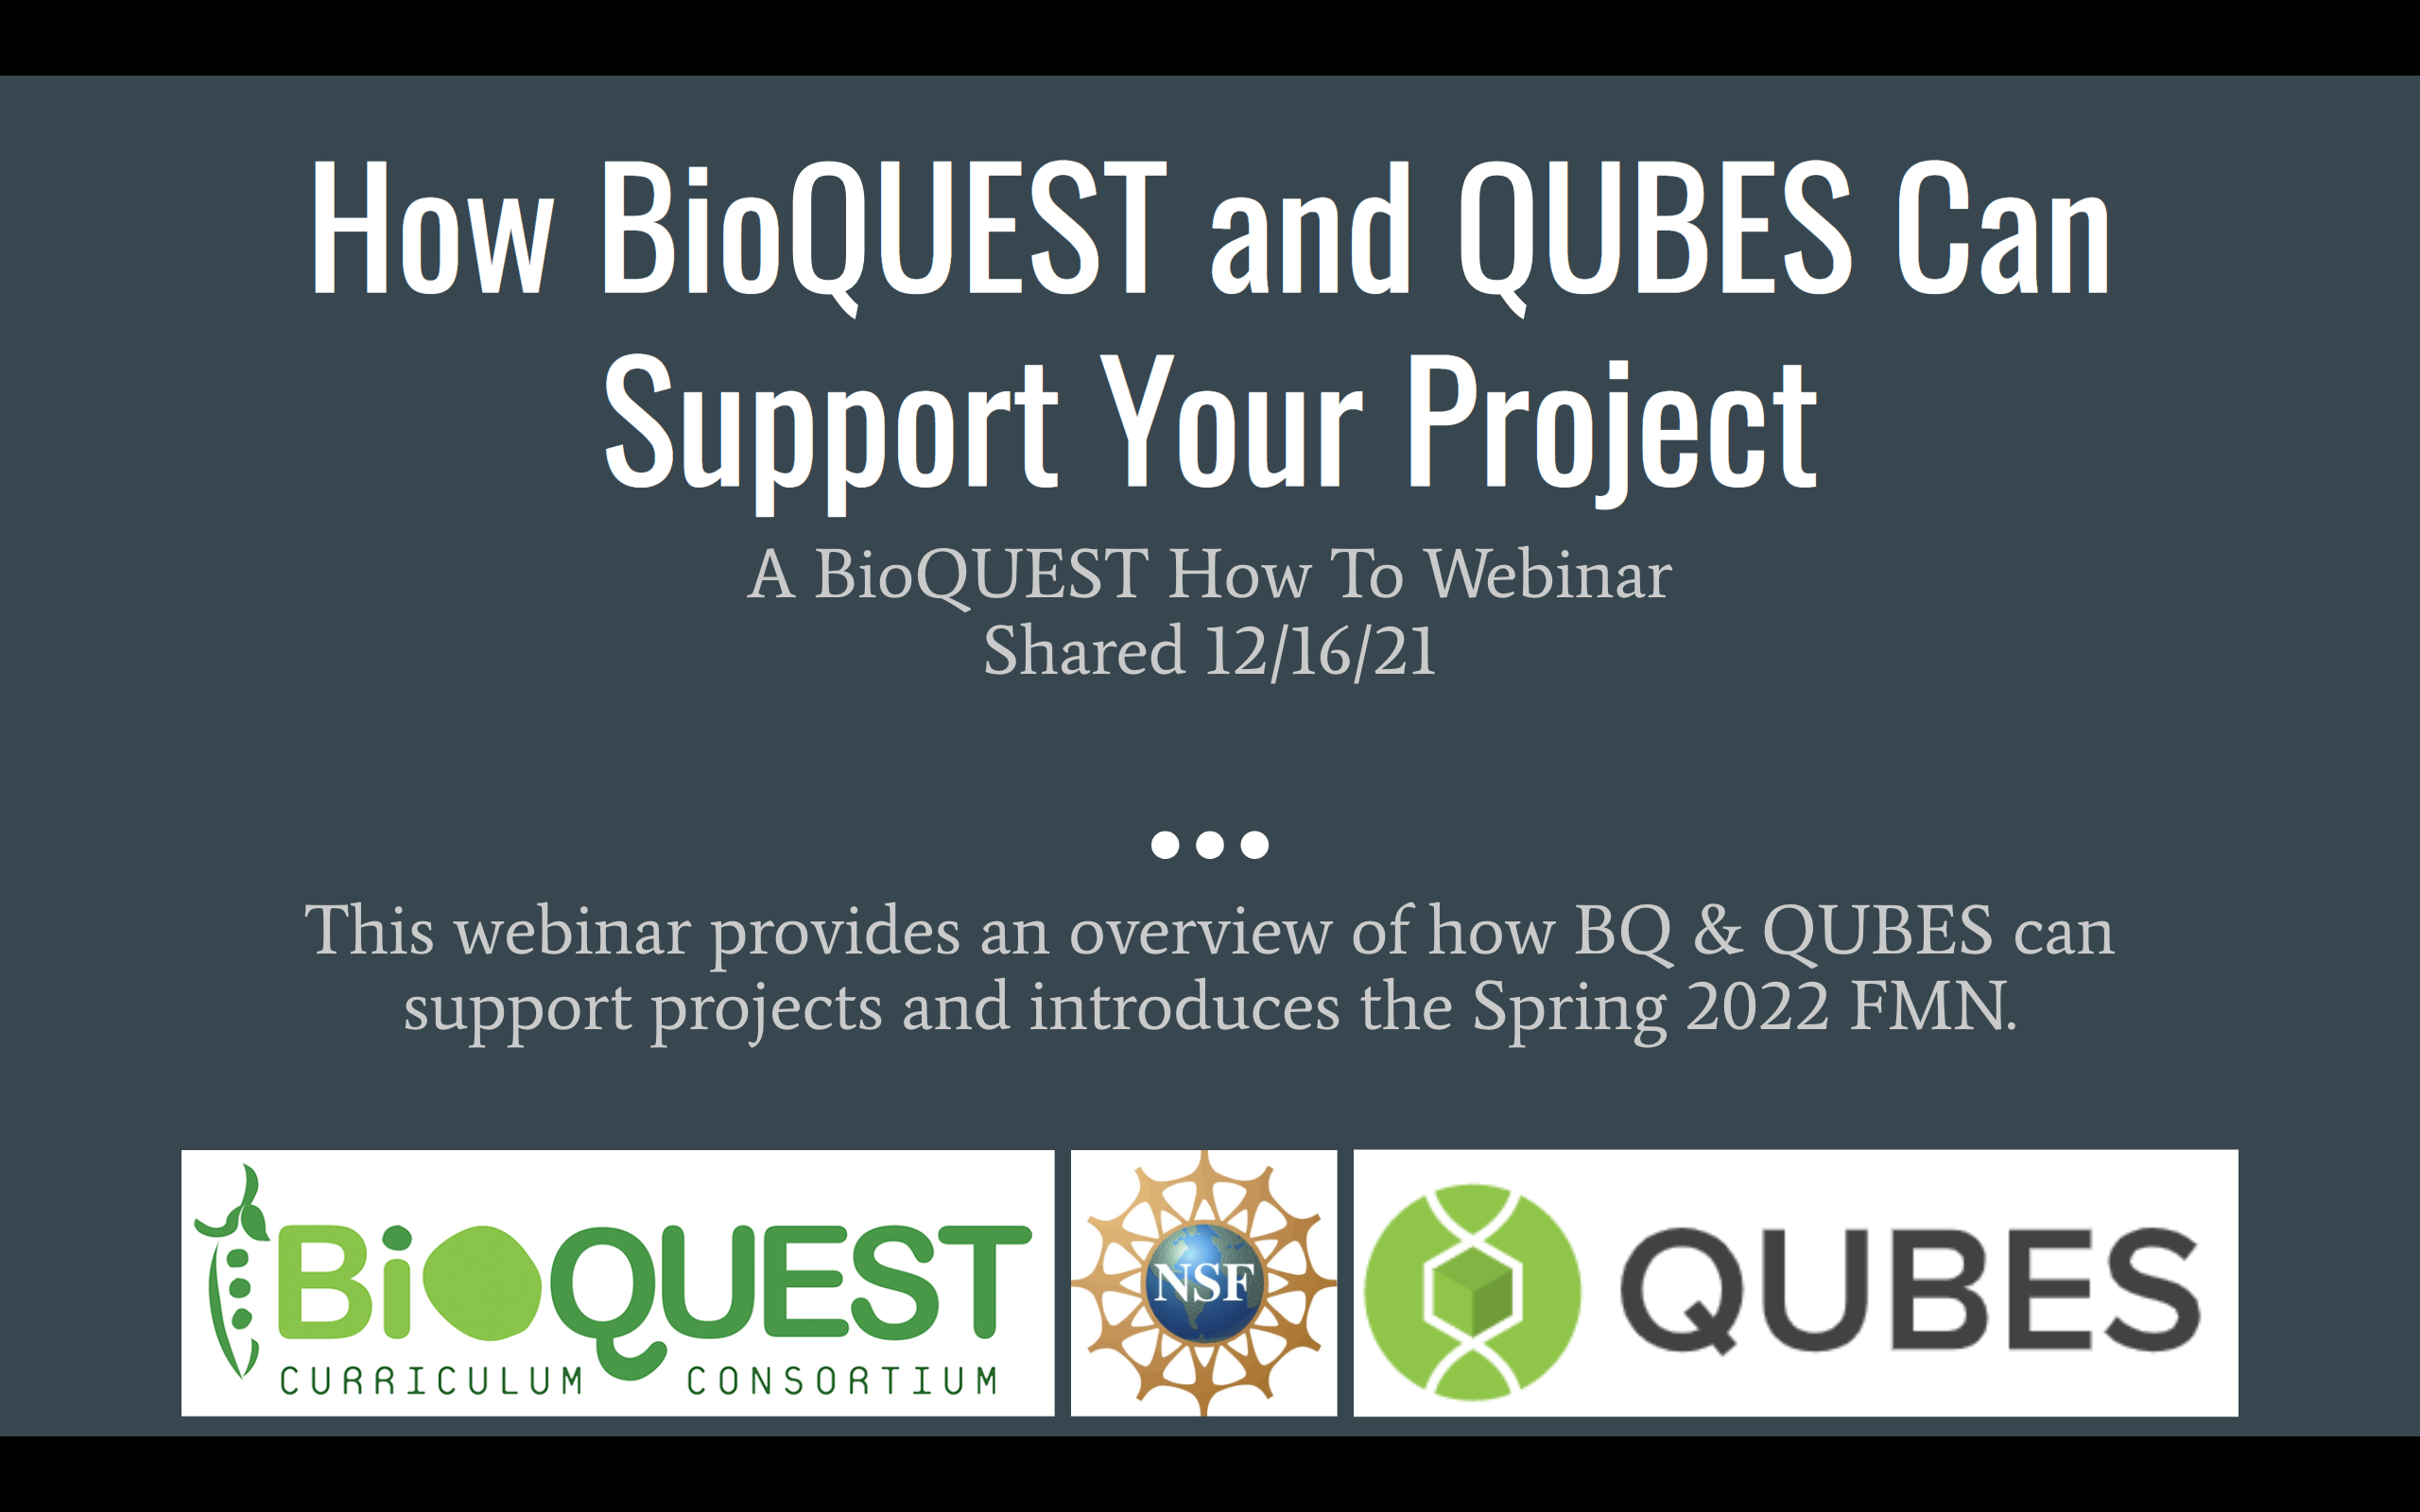 Webinar: How BioQUEST and QUBES Can Support Your Project